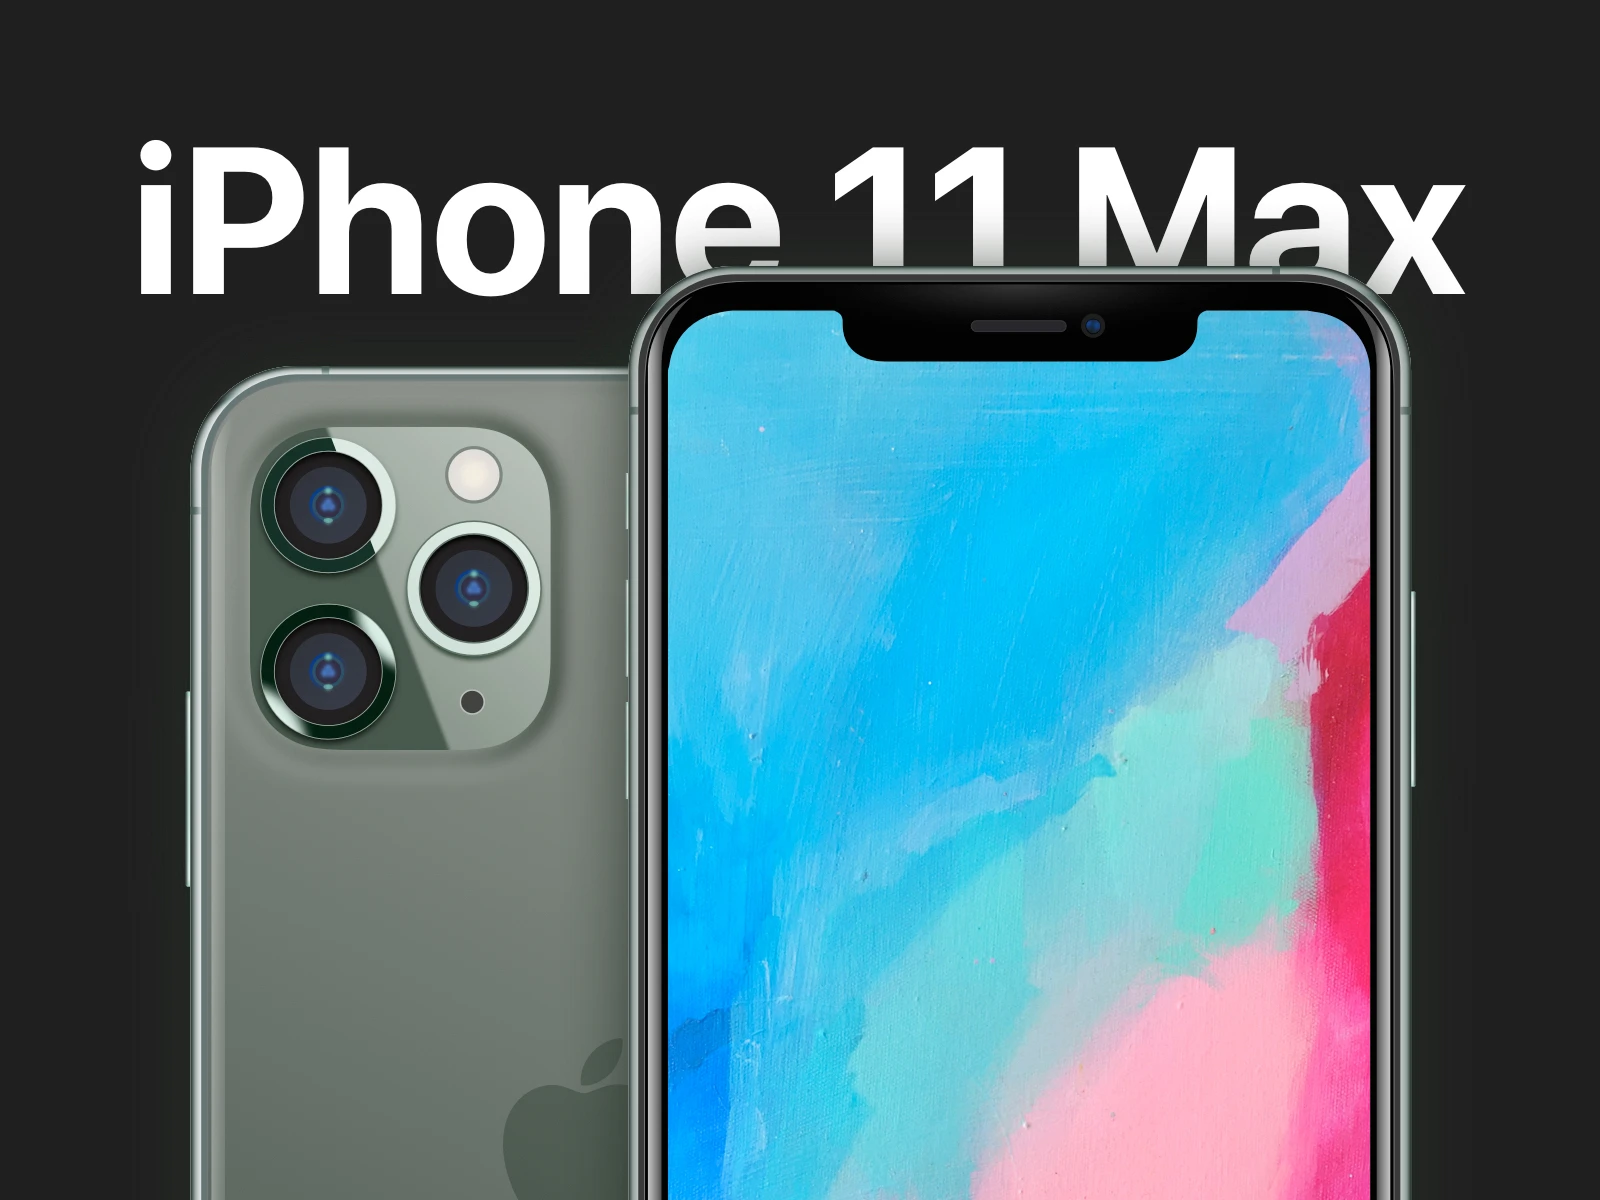 iPhone 11 Mockups for Sketch - iPhone 11 + iPhone 11 Pro. 10 variants